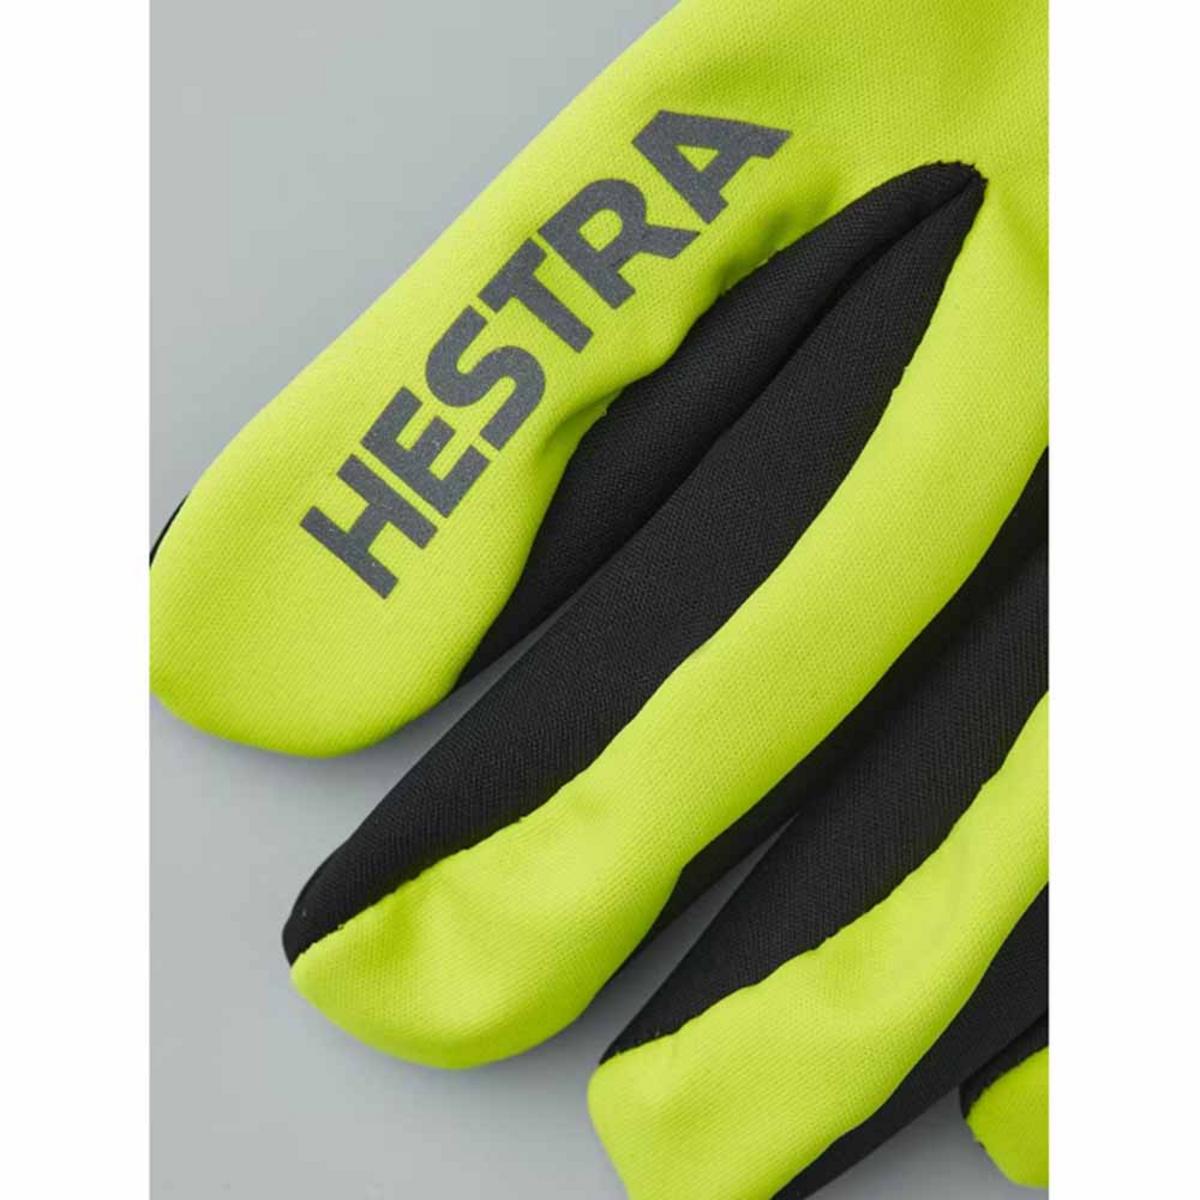 Hestra Unisex Runners All Weather Gloves